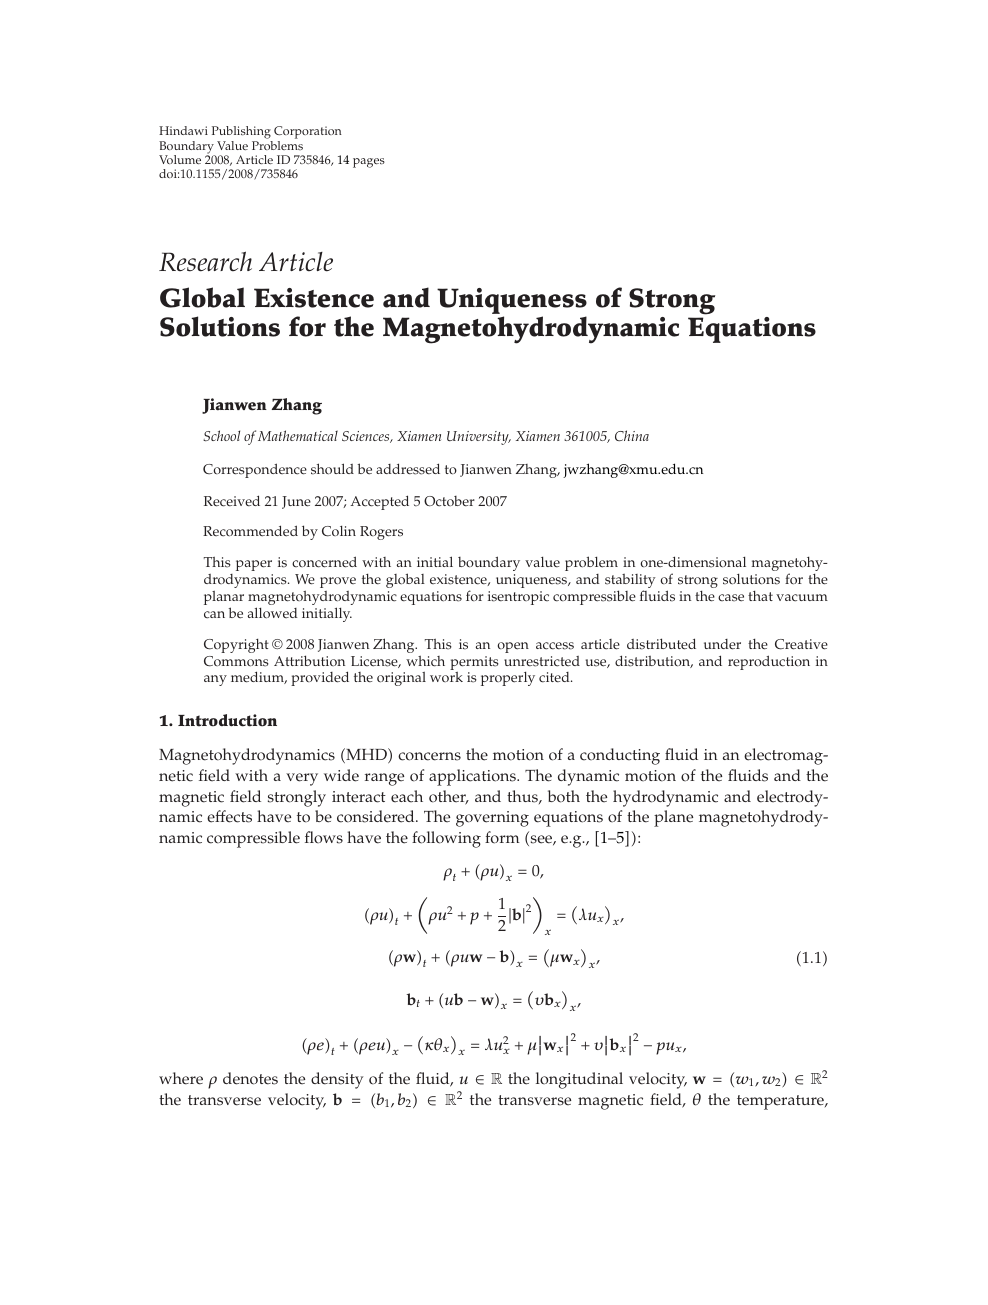 Global Existence And Uniqueness Of Strong Solutions For The Magnetohydrodynamic Equations Topic Of Research Paper In Mathematics Download Scholarly Article Pdf And Read For Free On Cyberleninka Open Science Hub